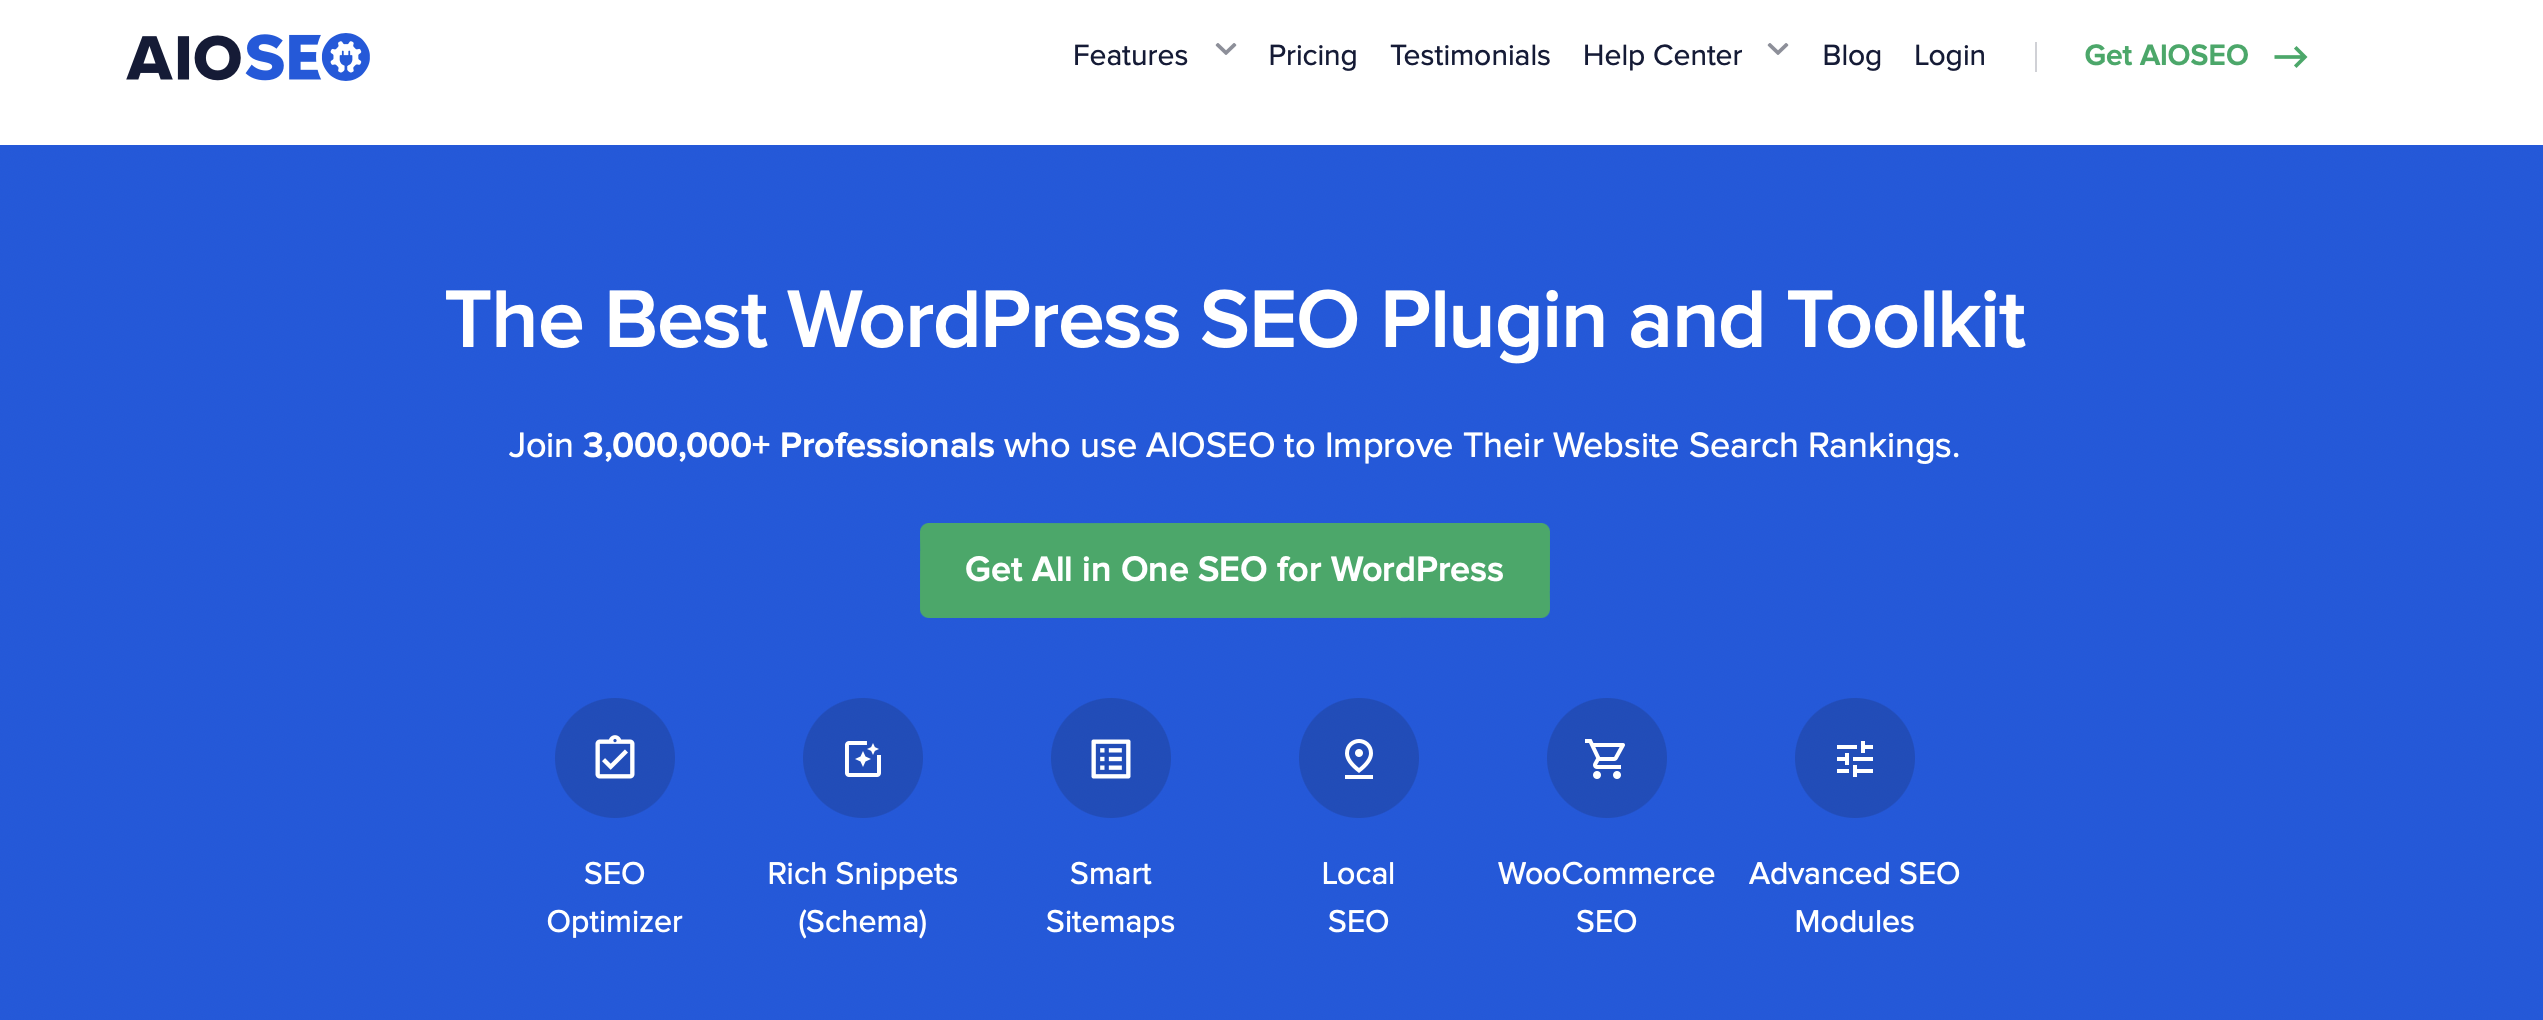 Generate leads with the AI SEO plugin.